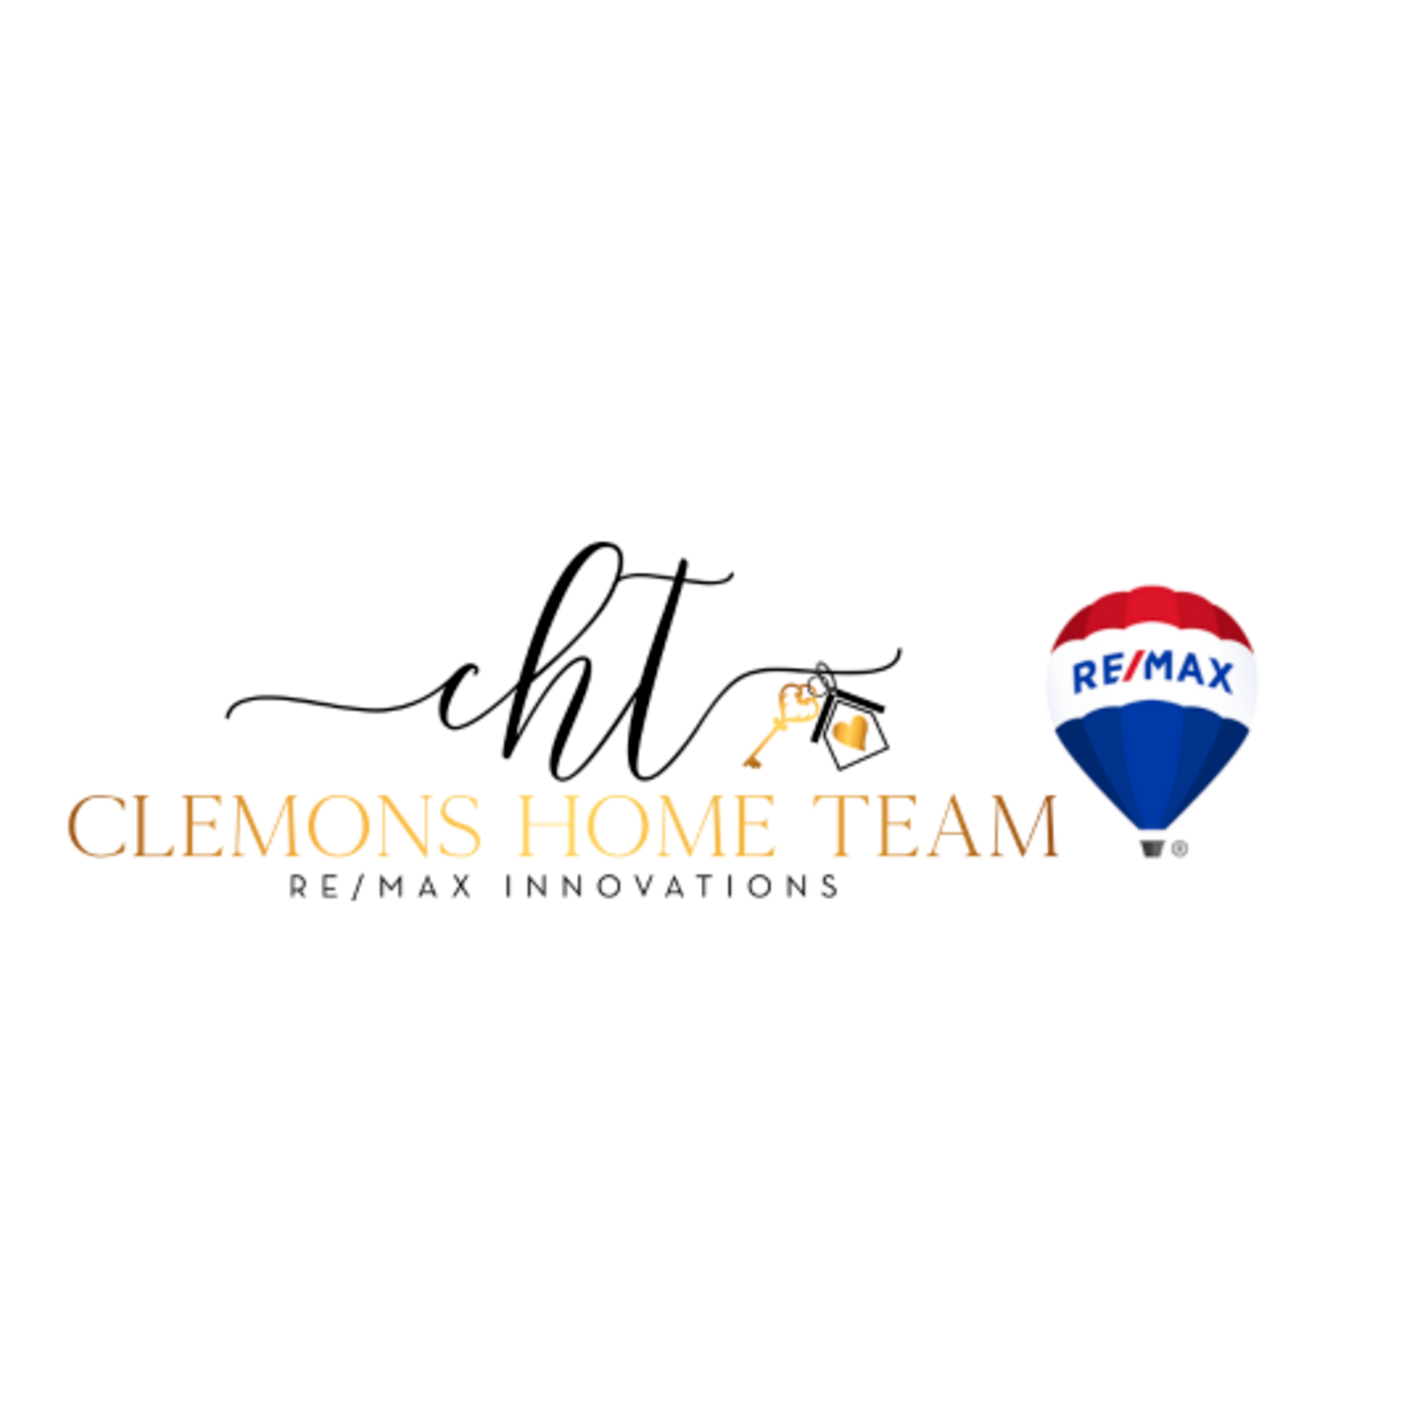 Clemons Home Team | RE/MAX Innovations